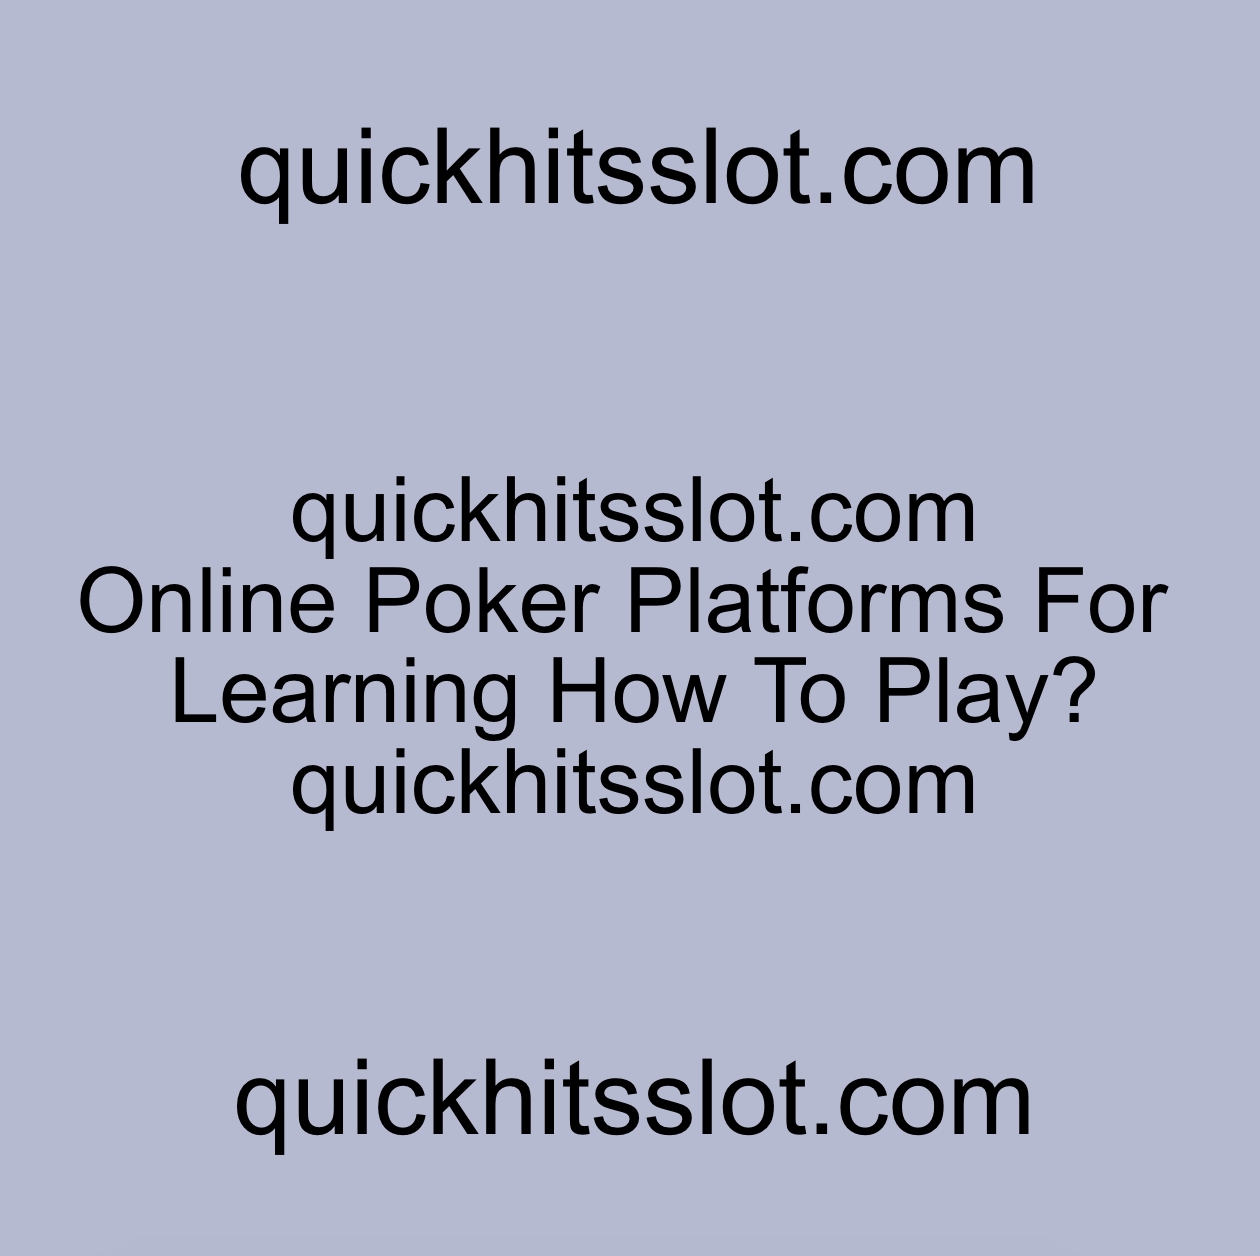 Online Poker Platforms For Learning How To Play? quickhitsslot.com